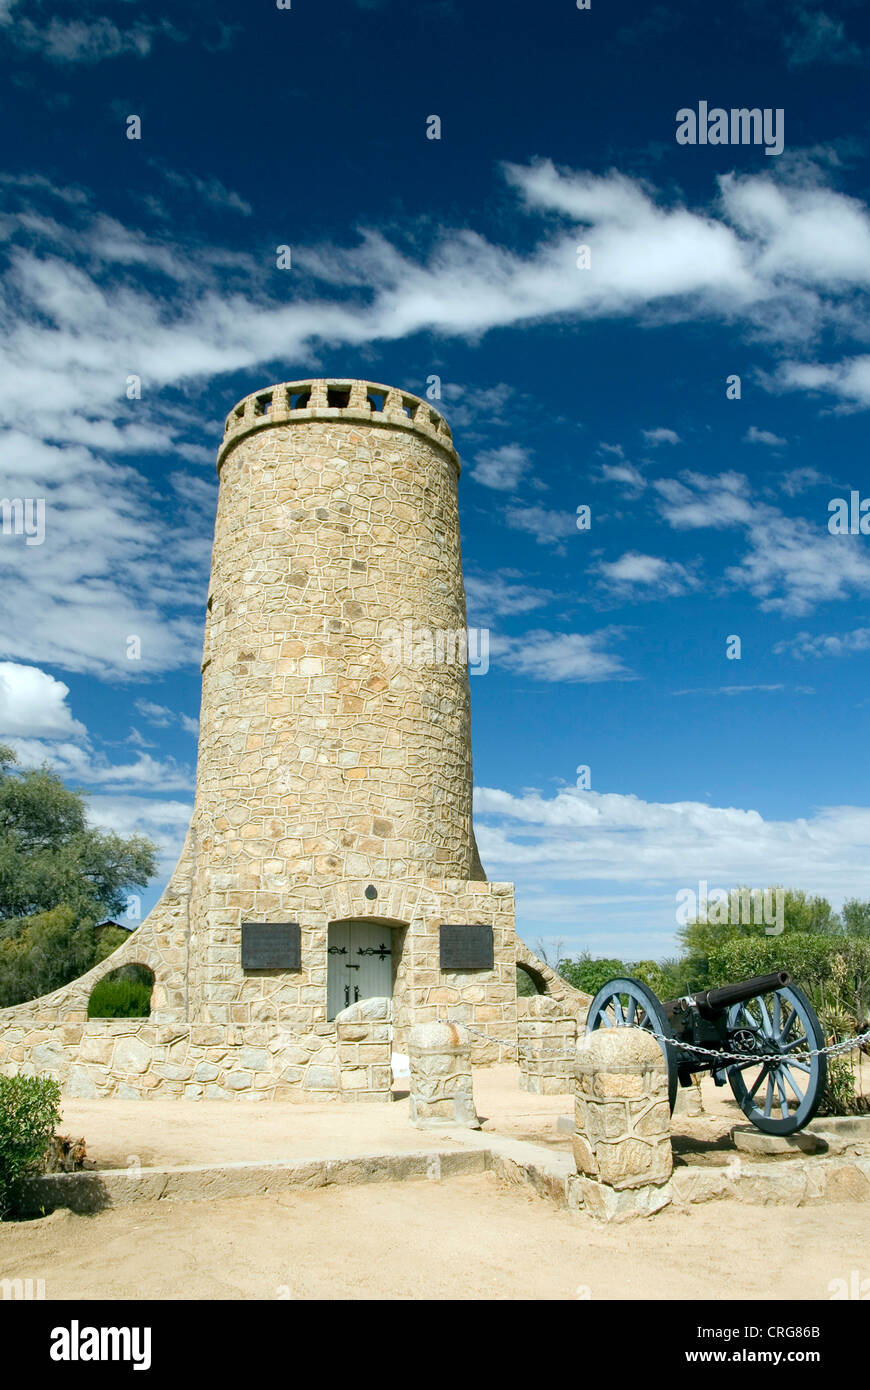 Franke tower build in 1908 with historical connon, Namibia, Omaruru Stock Photo